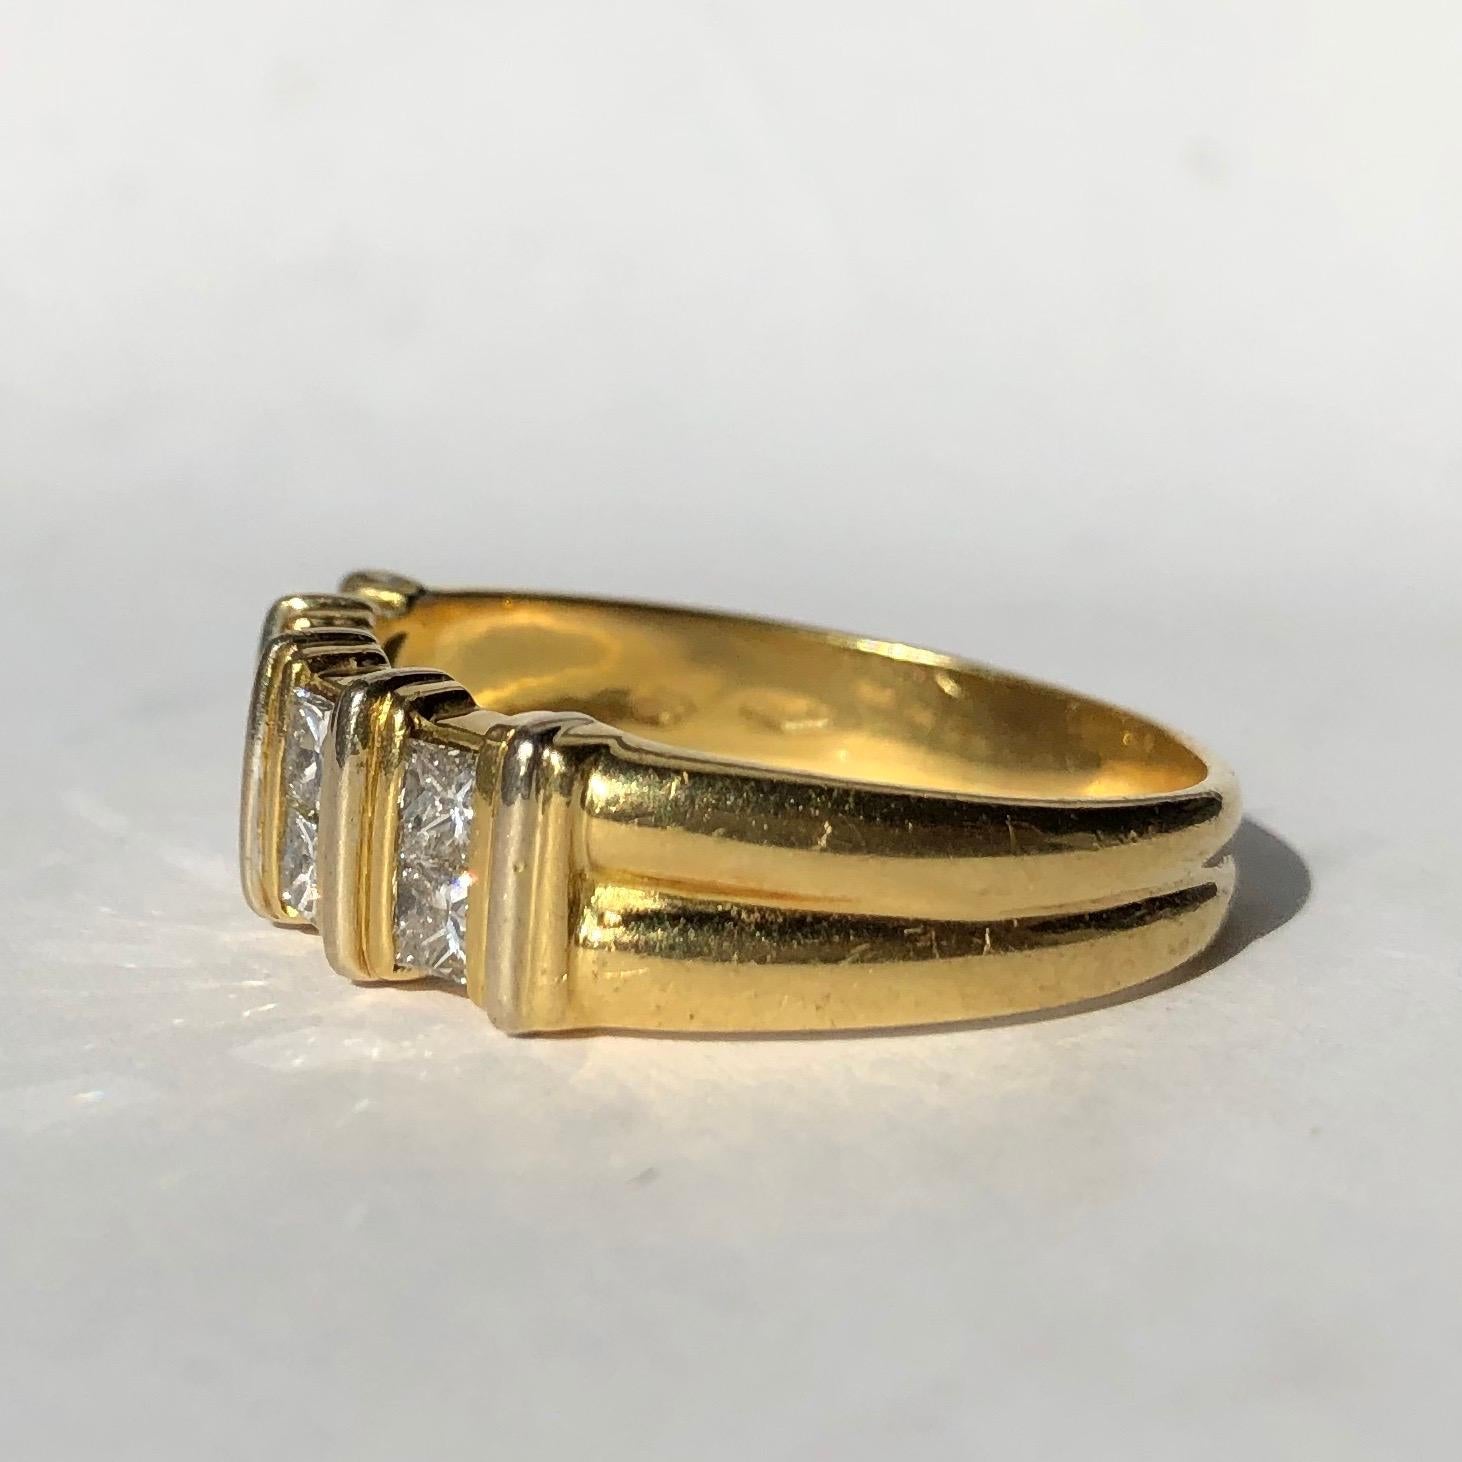 This gorgeous chunky gold band holds a total of eight great sized princess cut diamonds. Each diamond measures 10pts and have the most fabulous sparkle. Made in London, England.

Ring Size: Z+3 or 13 3/4
Band Width: 7.5mm 

Weight: 10.38g